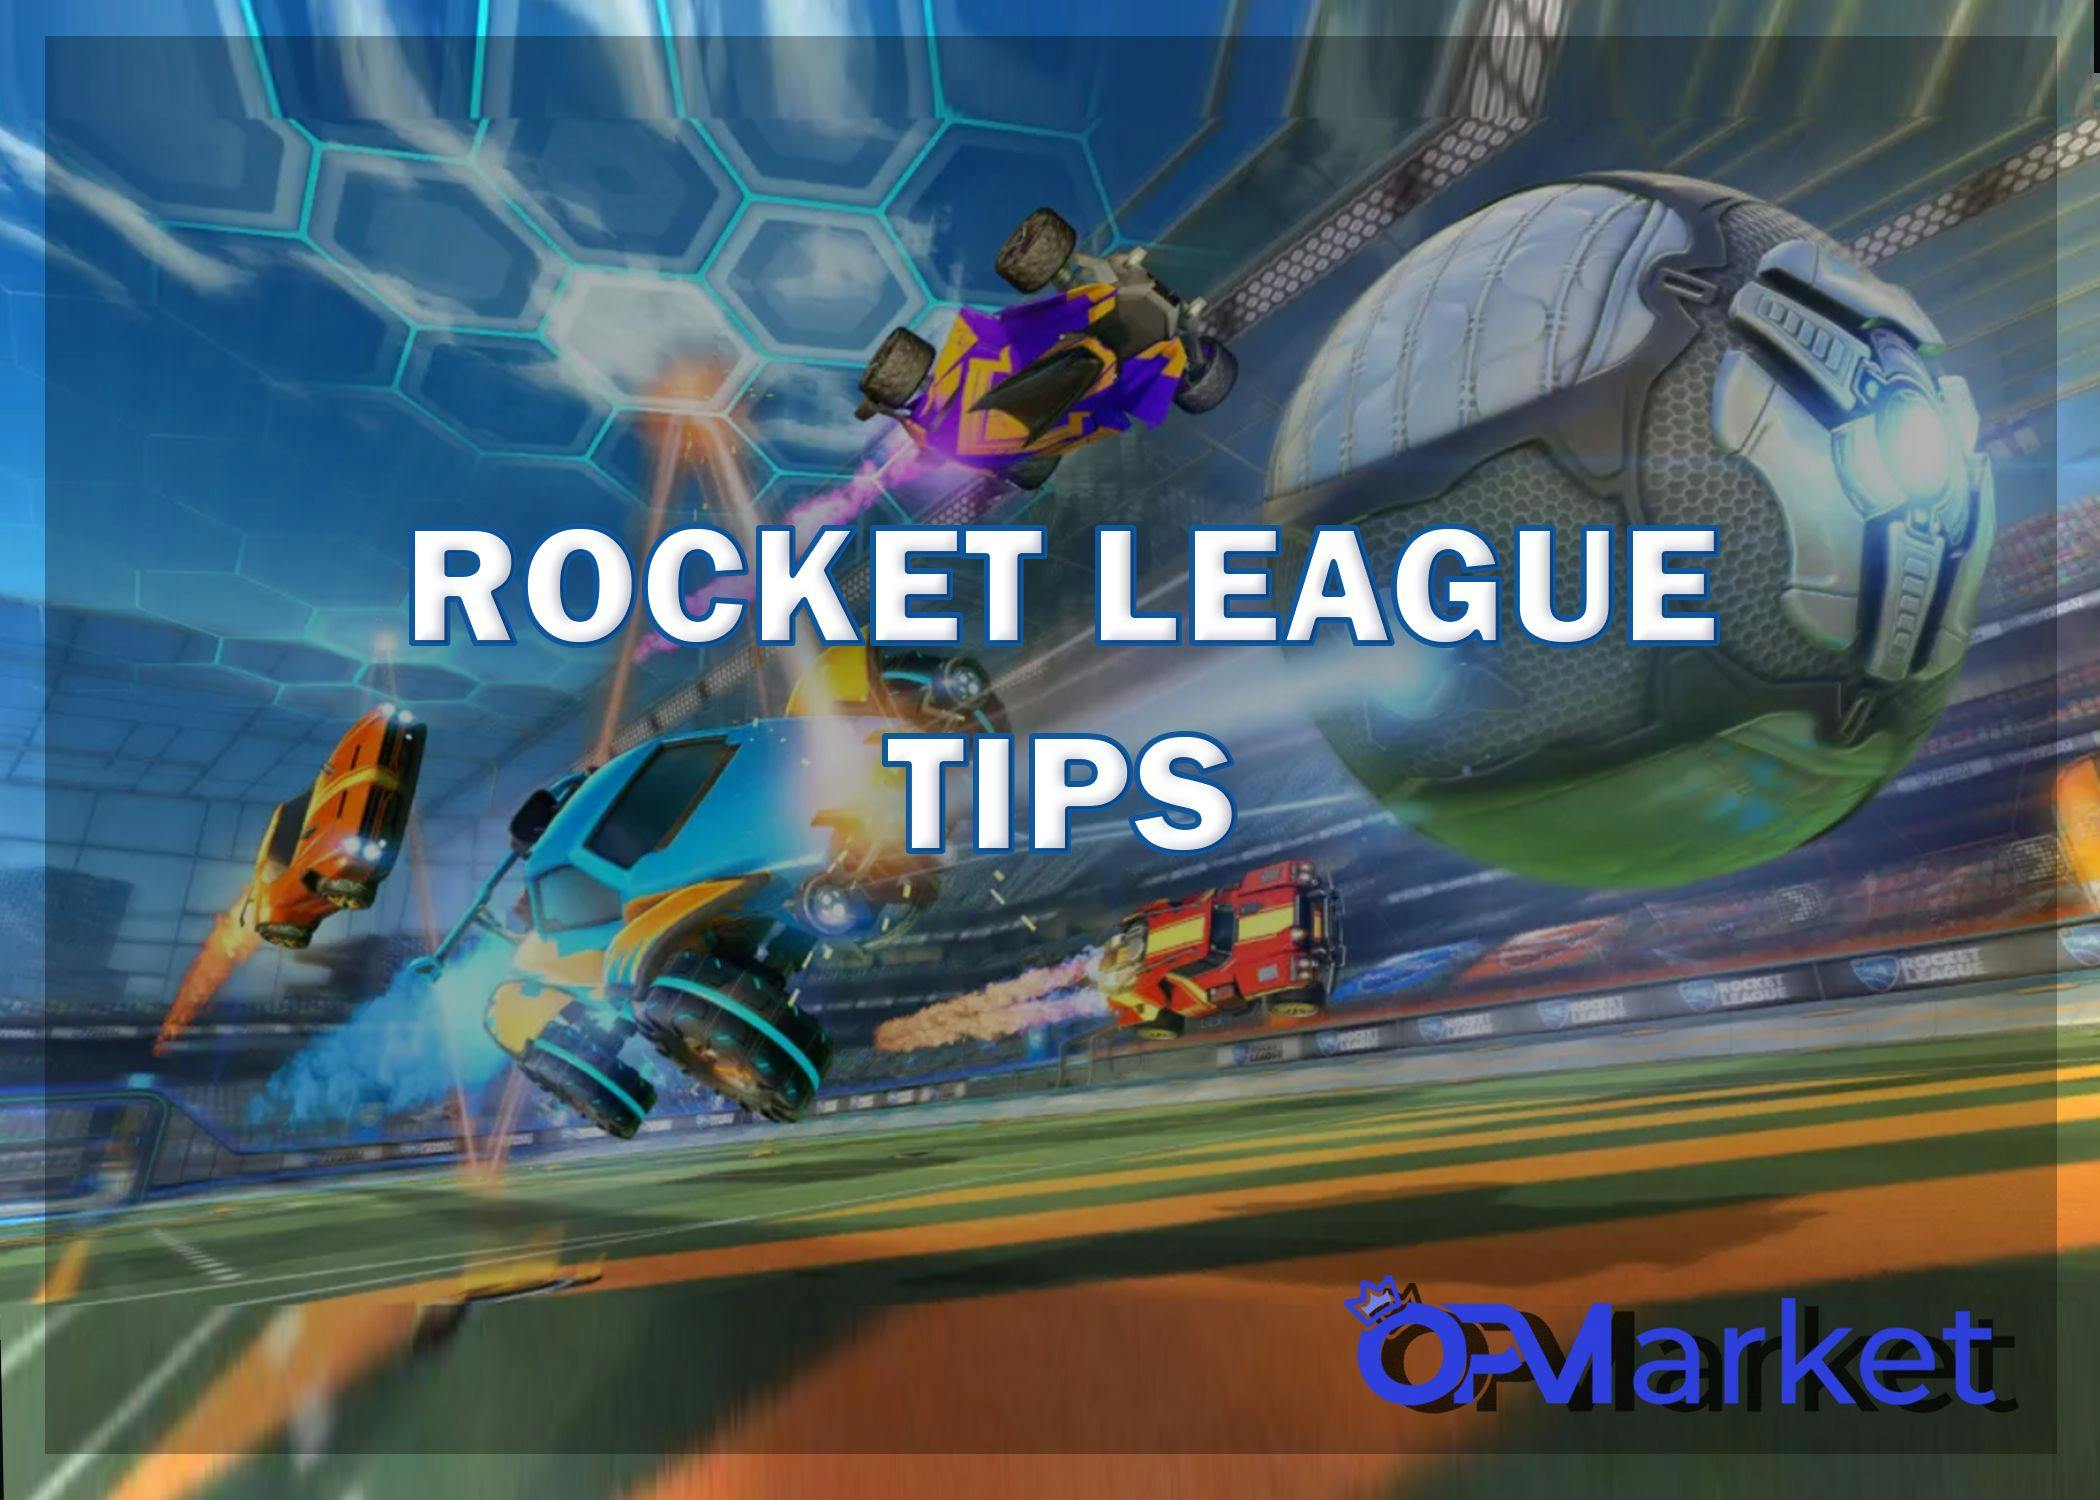 Rocket League Tips: The Best Way to Get Better at Rocket League